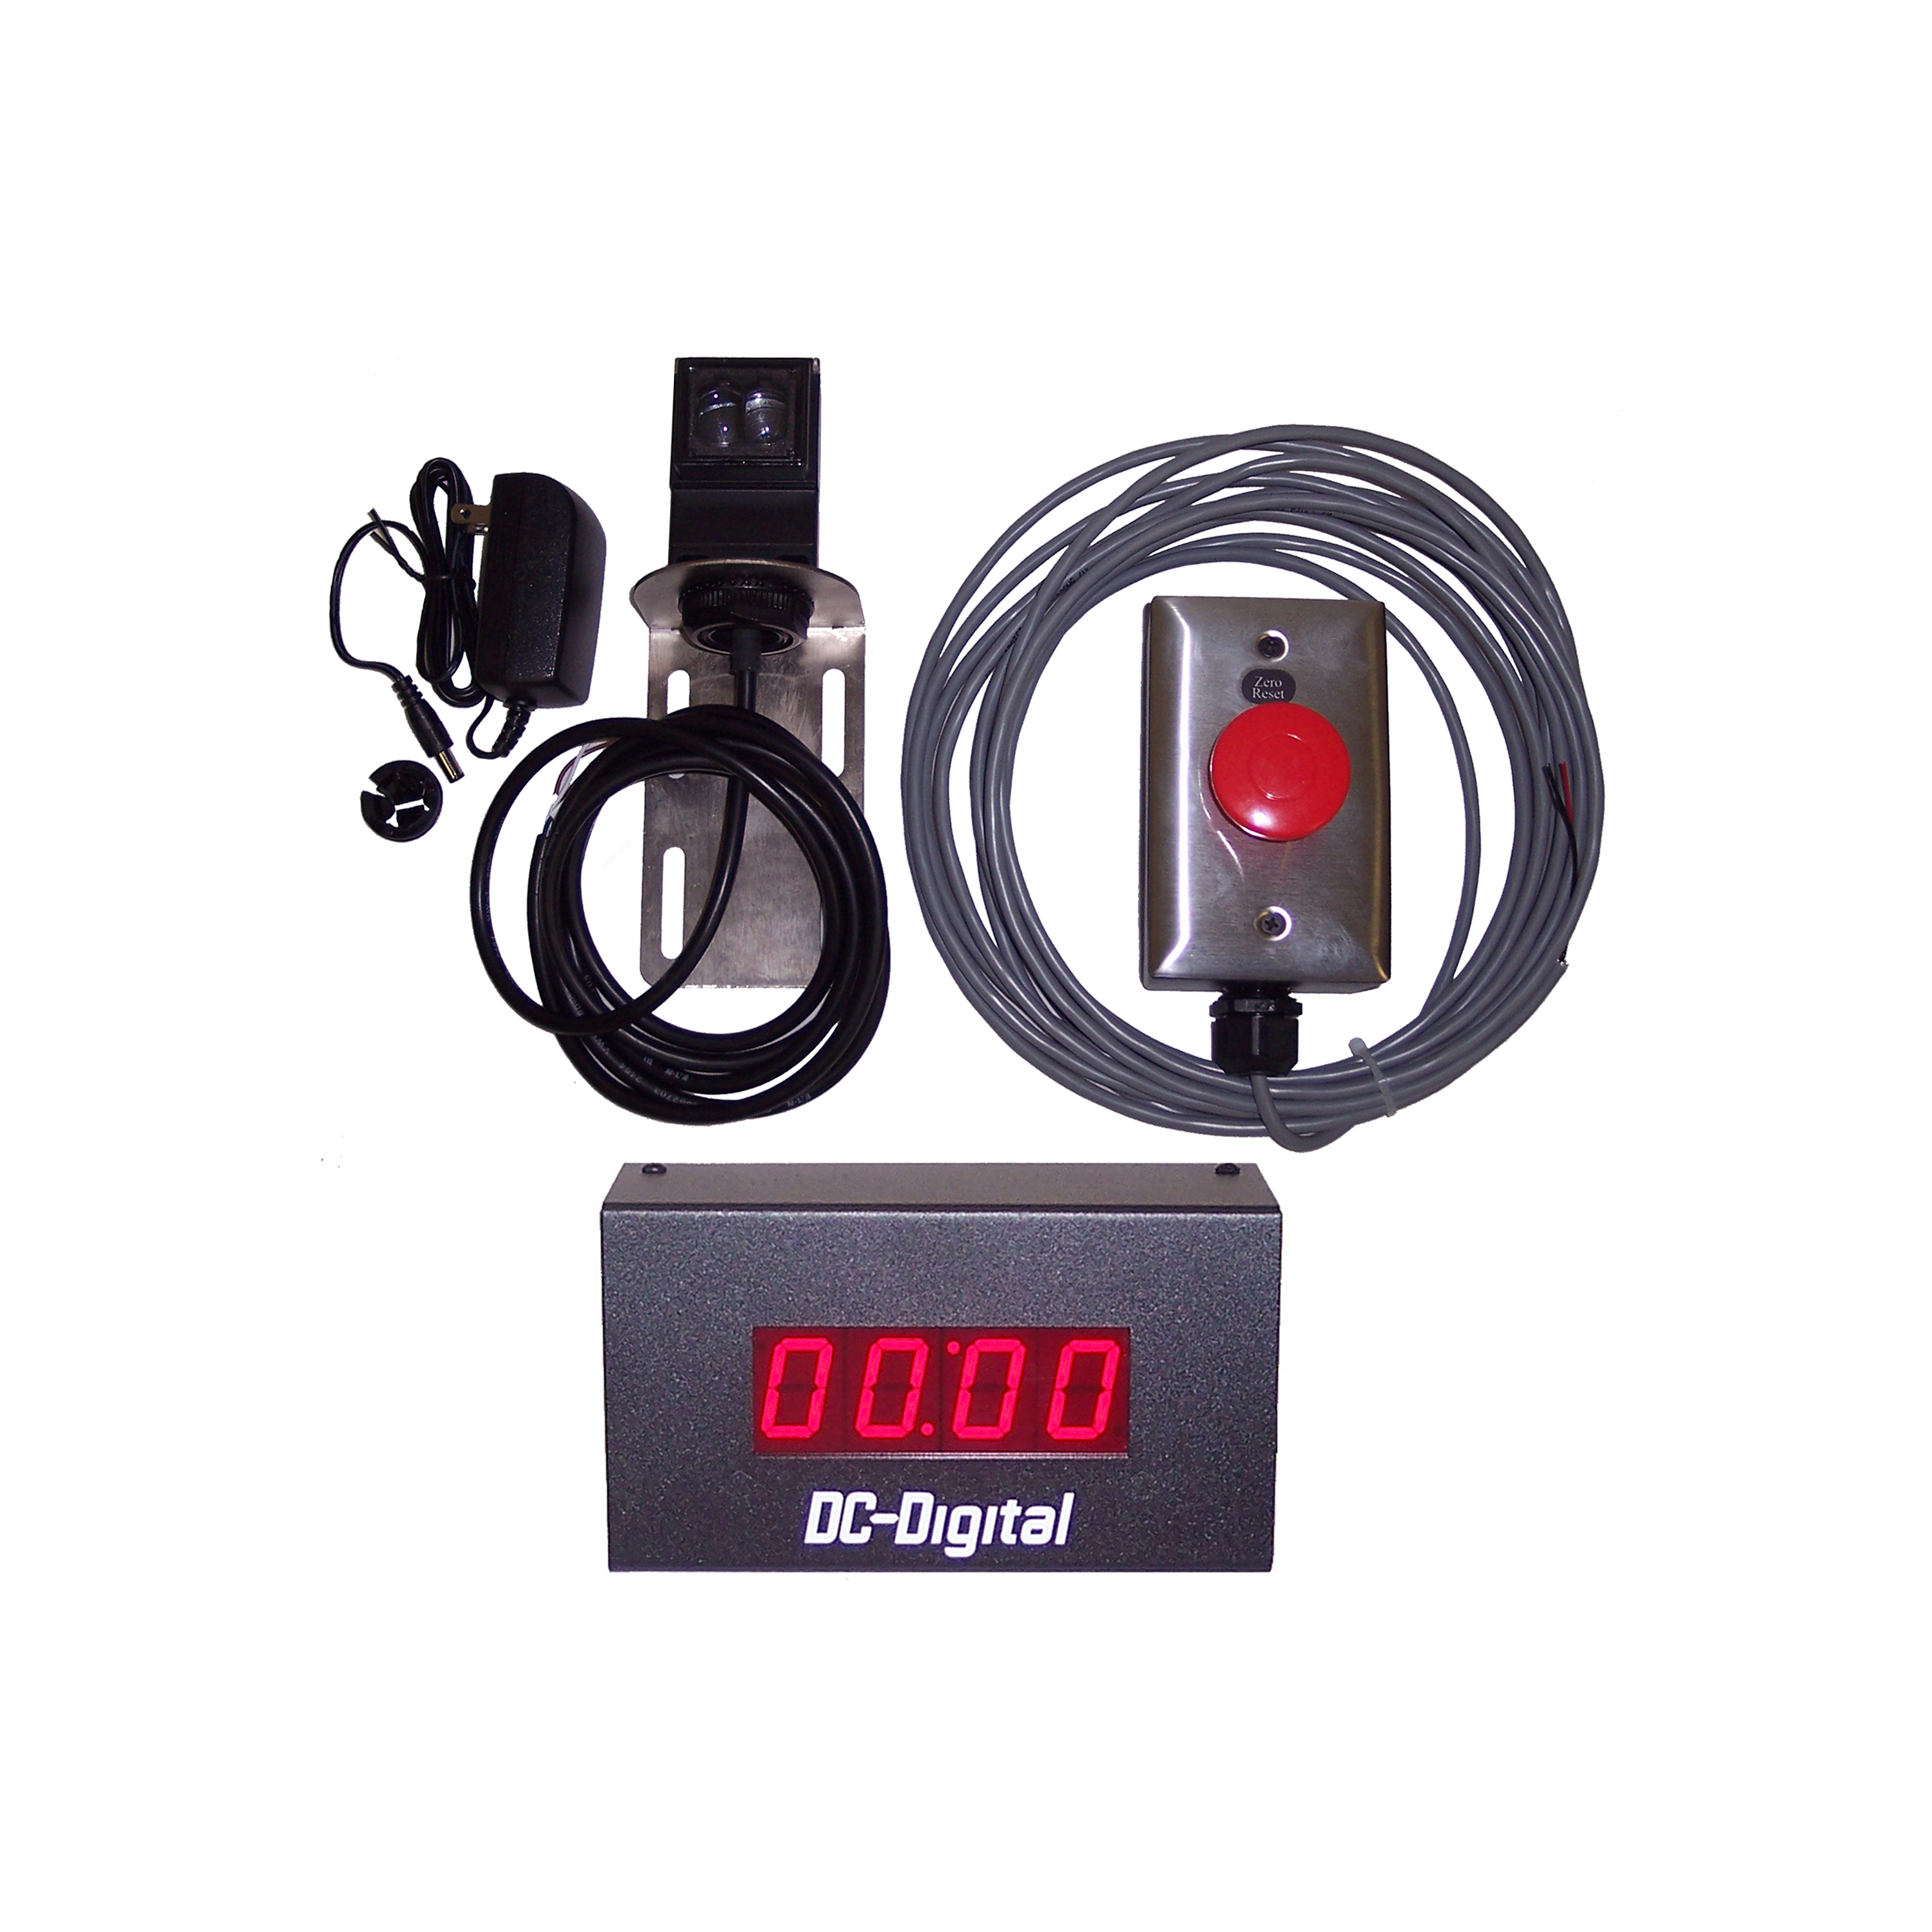 Complete all in one process timing package - sensor - 1 inch digital LED display - remote reset switch